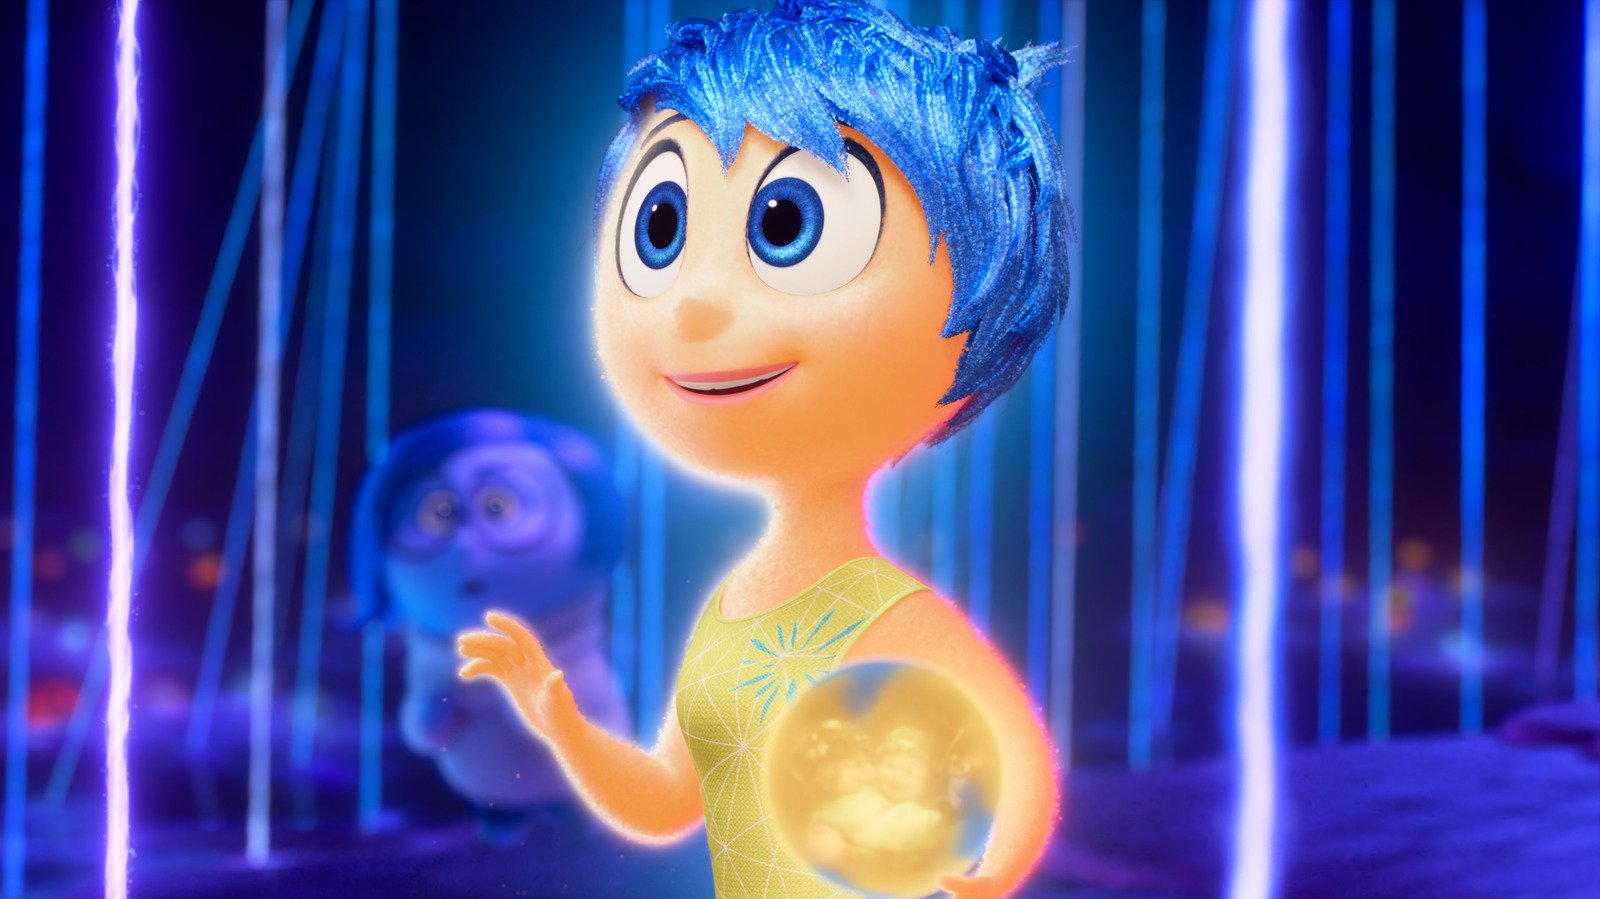 Inside Out 2 Has Officially Claimed A Major Box Office Record